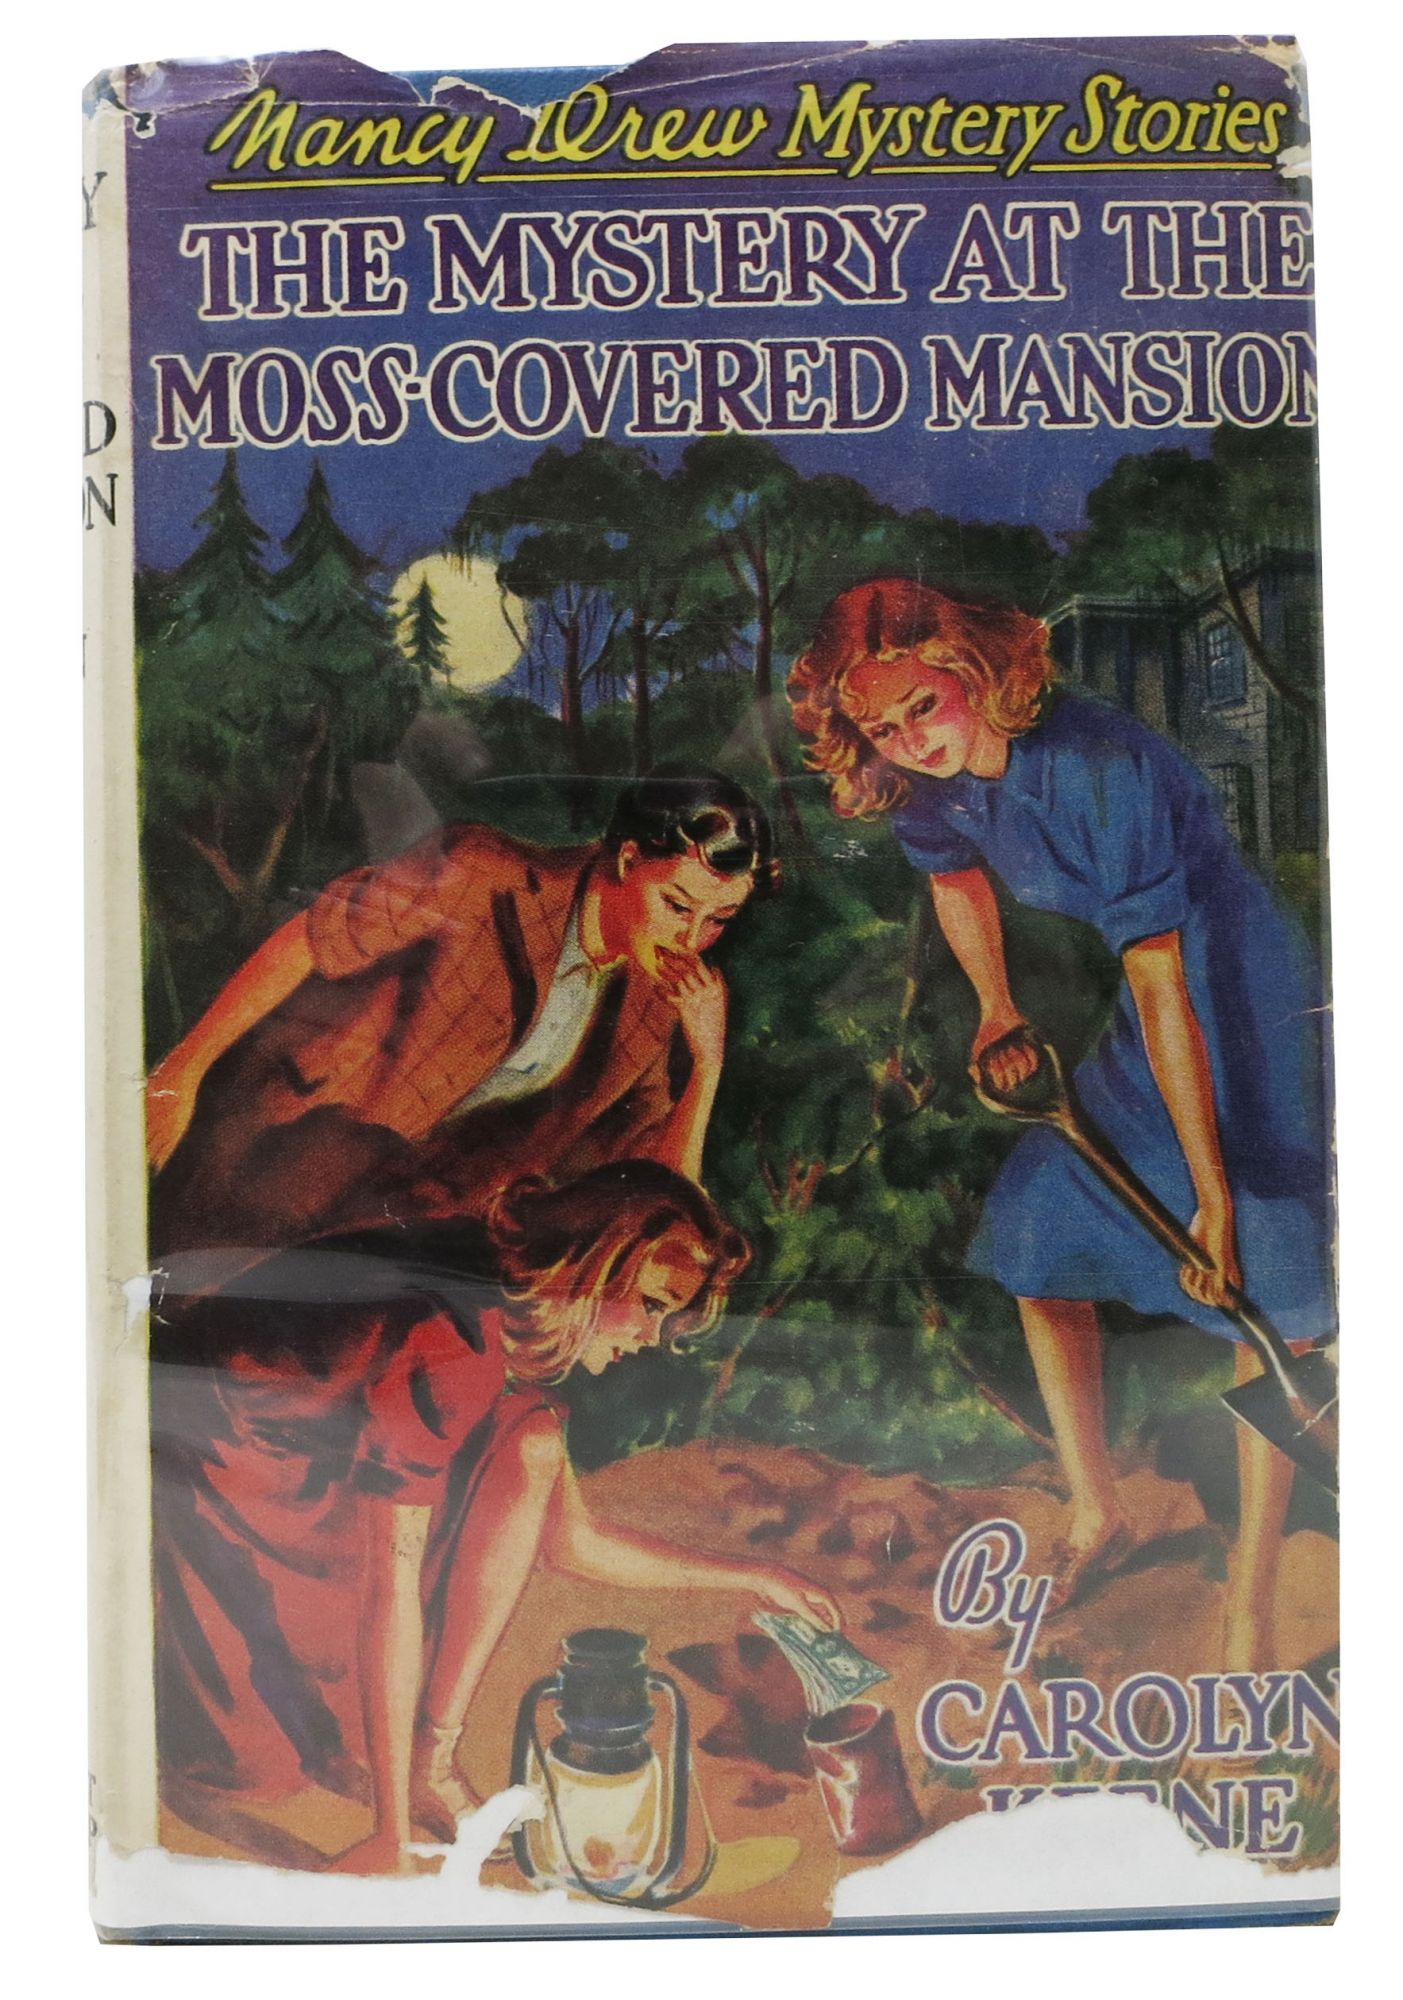 Keene, Carolyn - The MYSTERY At The MOSS-COVERED MANSION. The Nancy Drew Mystery Series #18